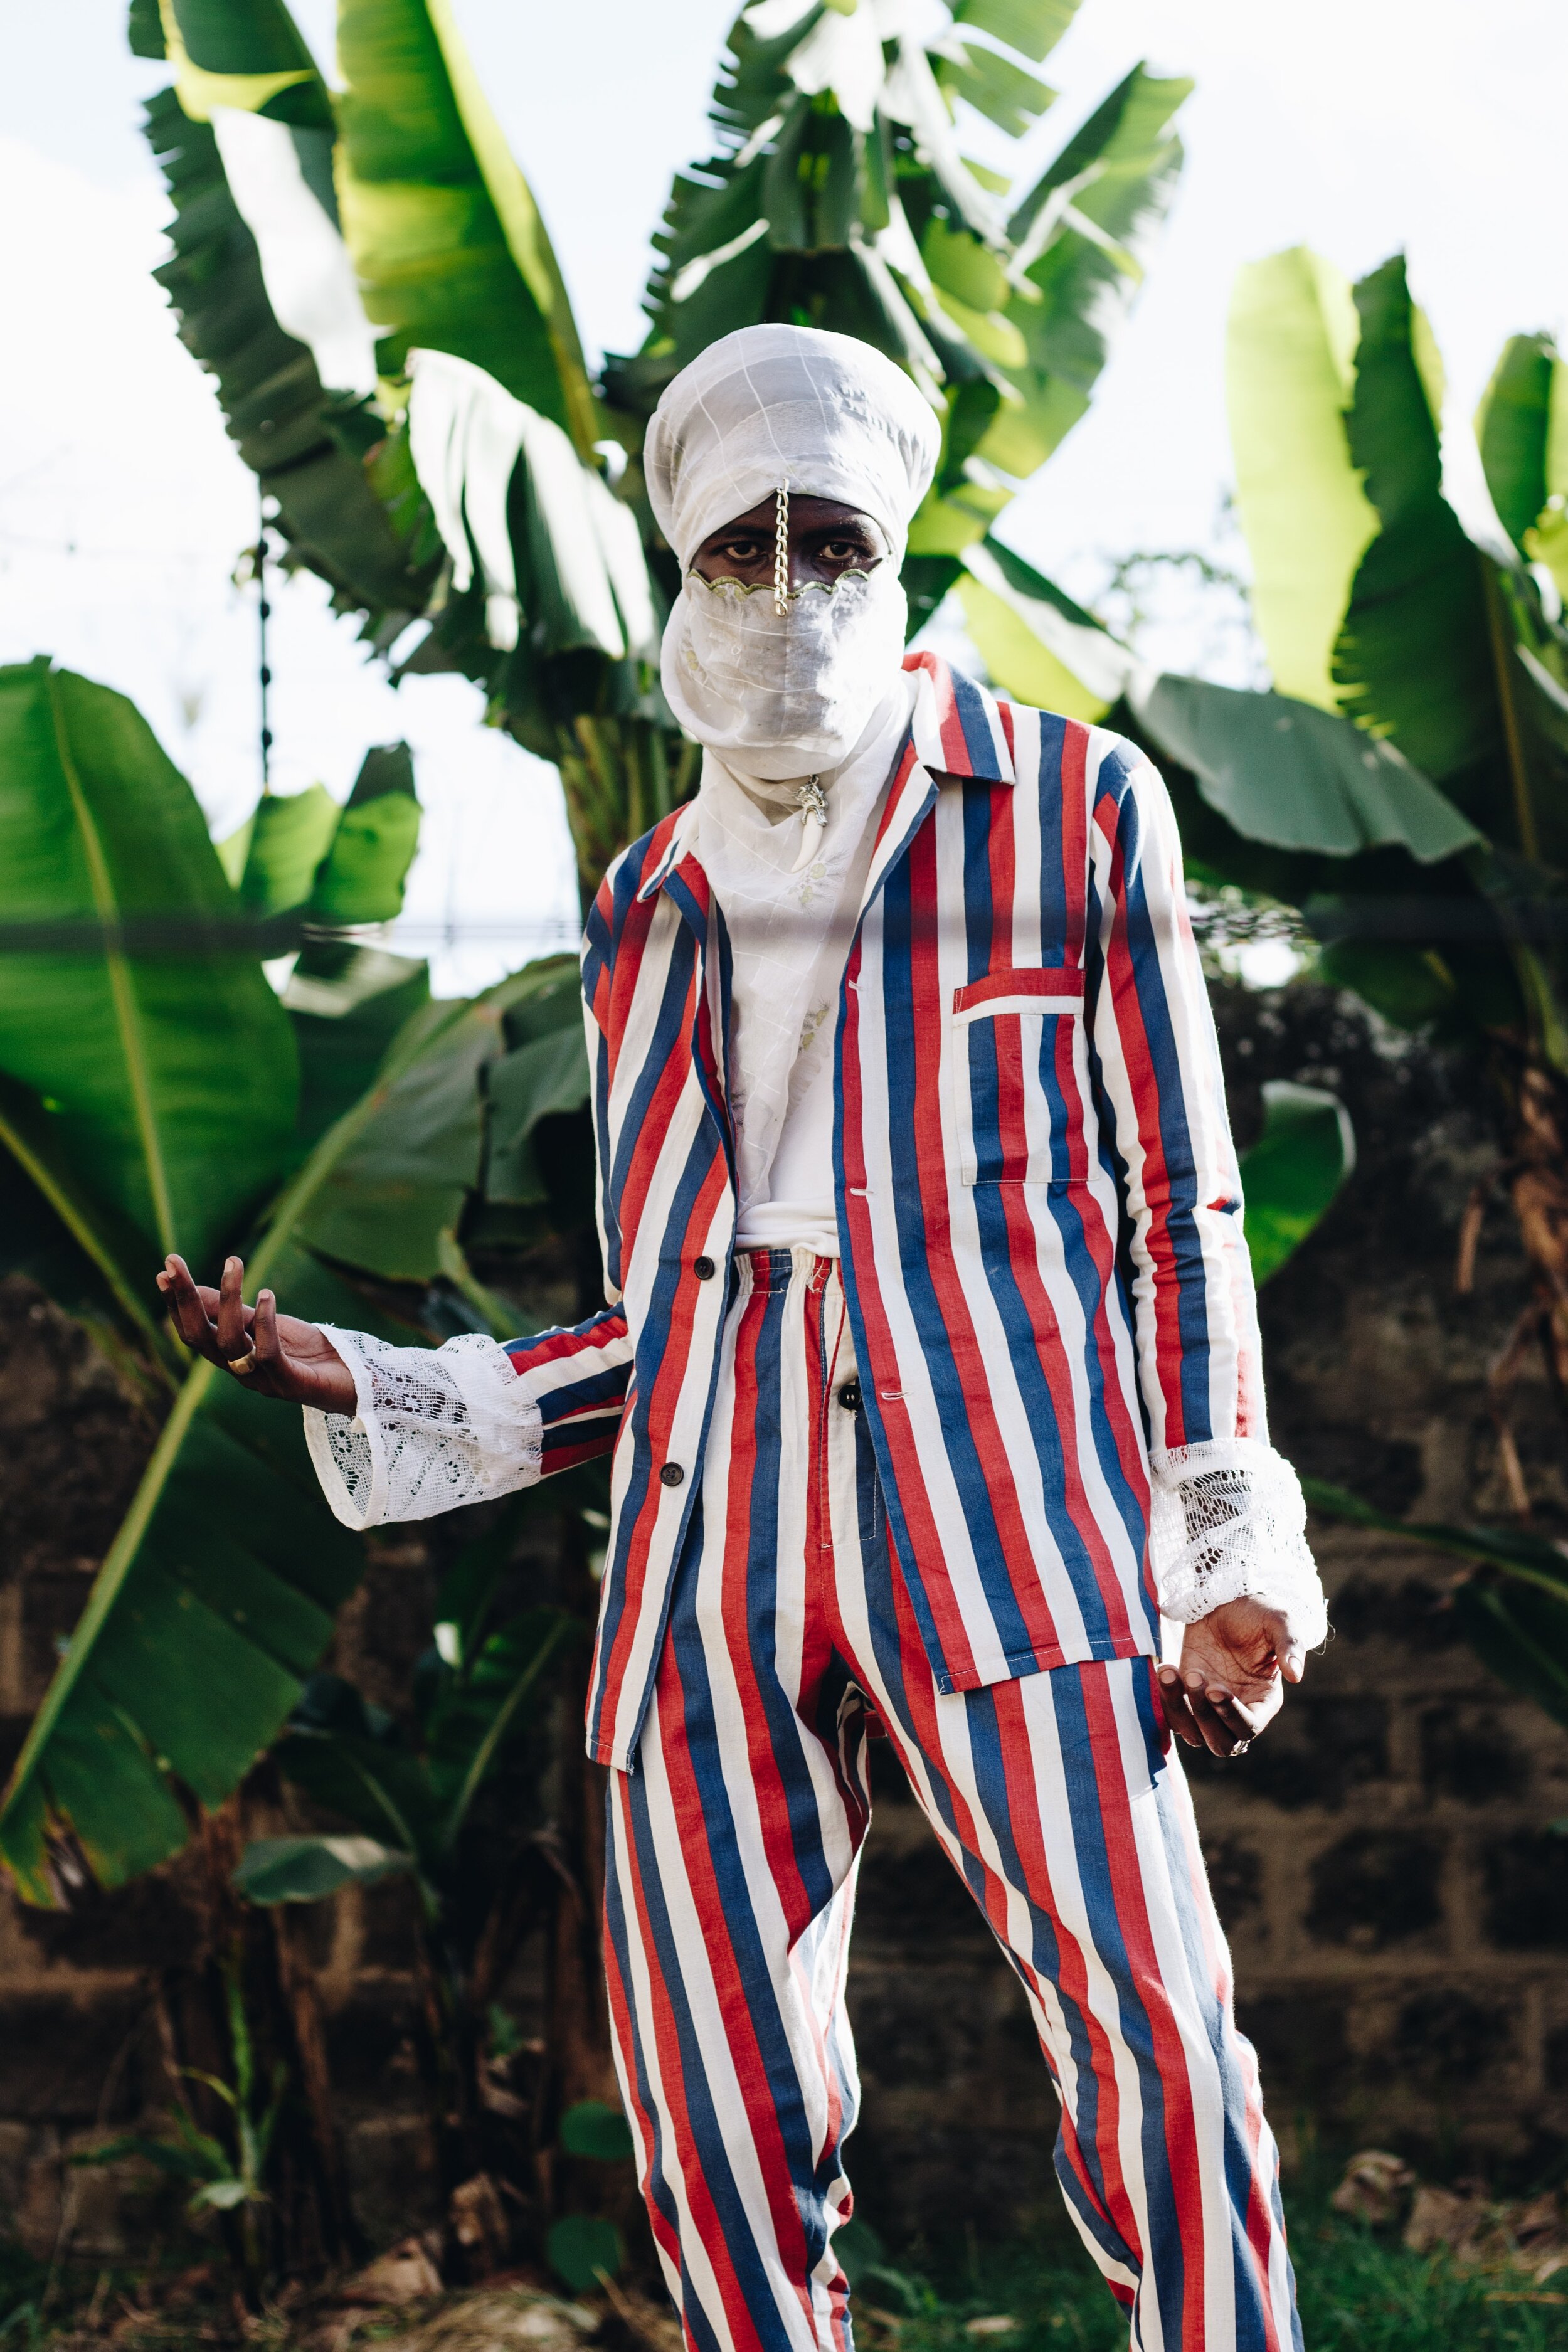 man-in-blue-white-and-red-striped-suit-standing-near-banana-2297592.jpg